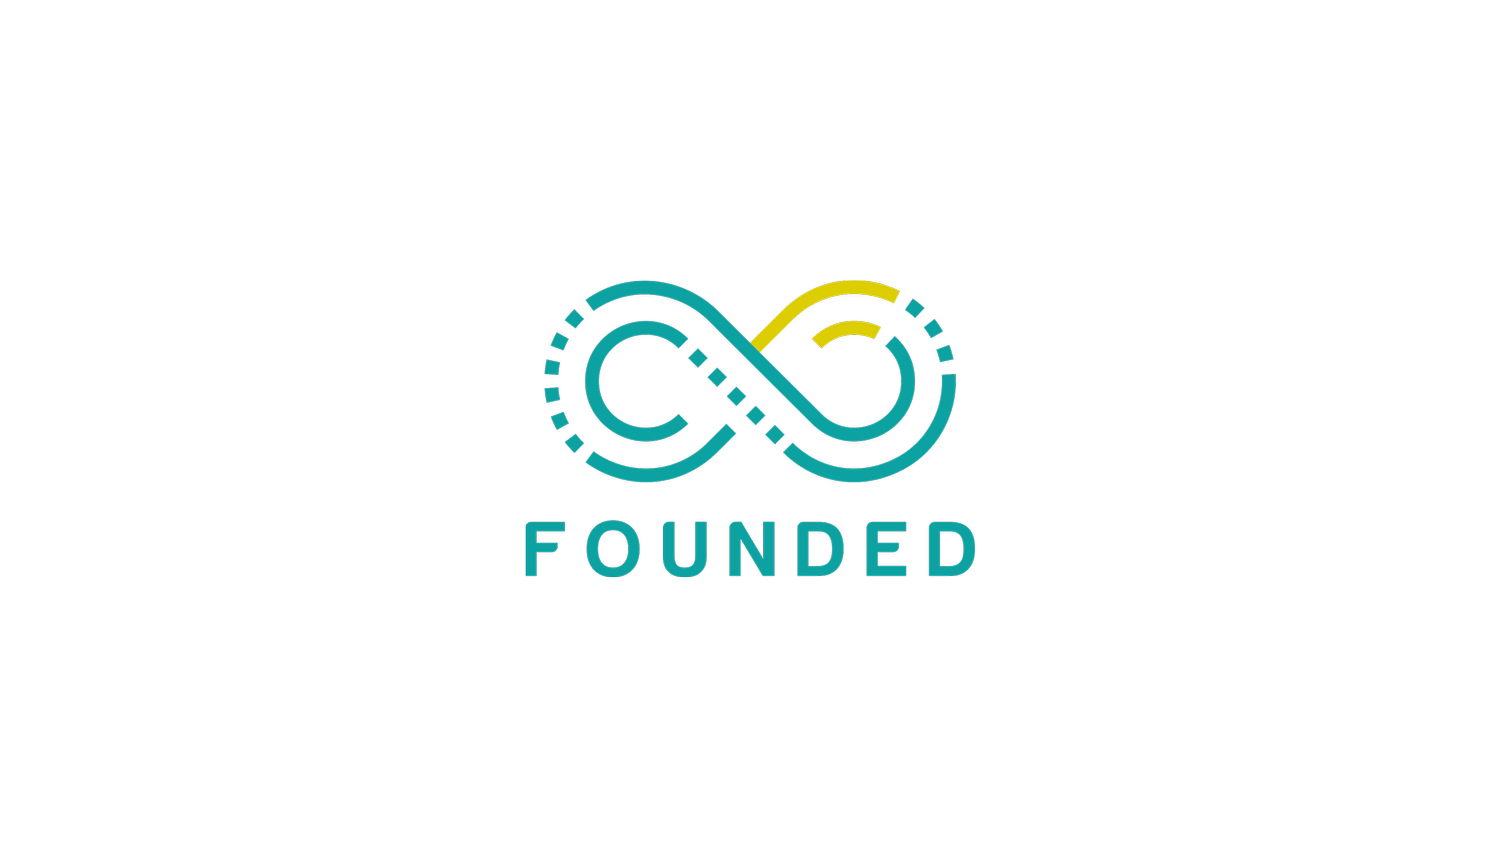 founded